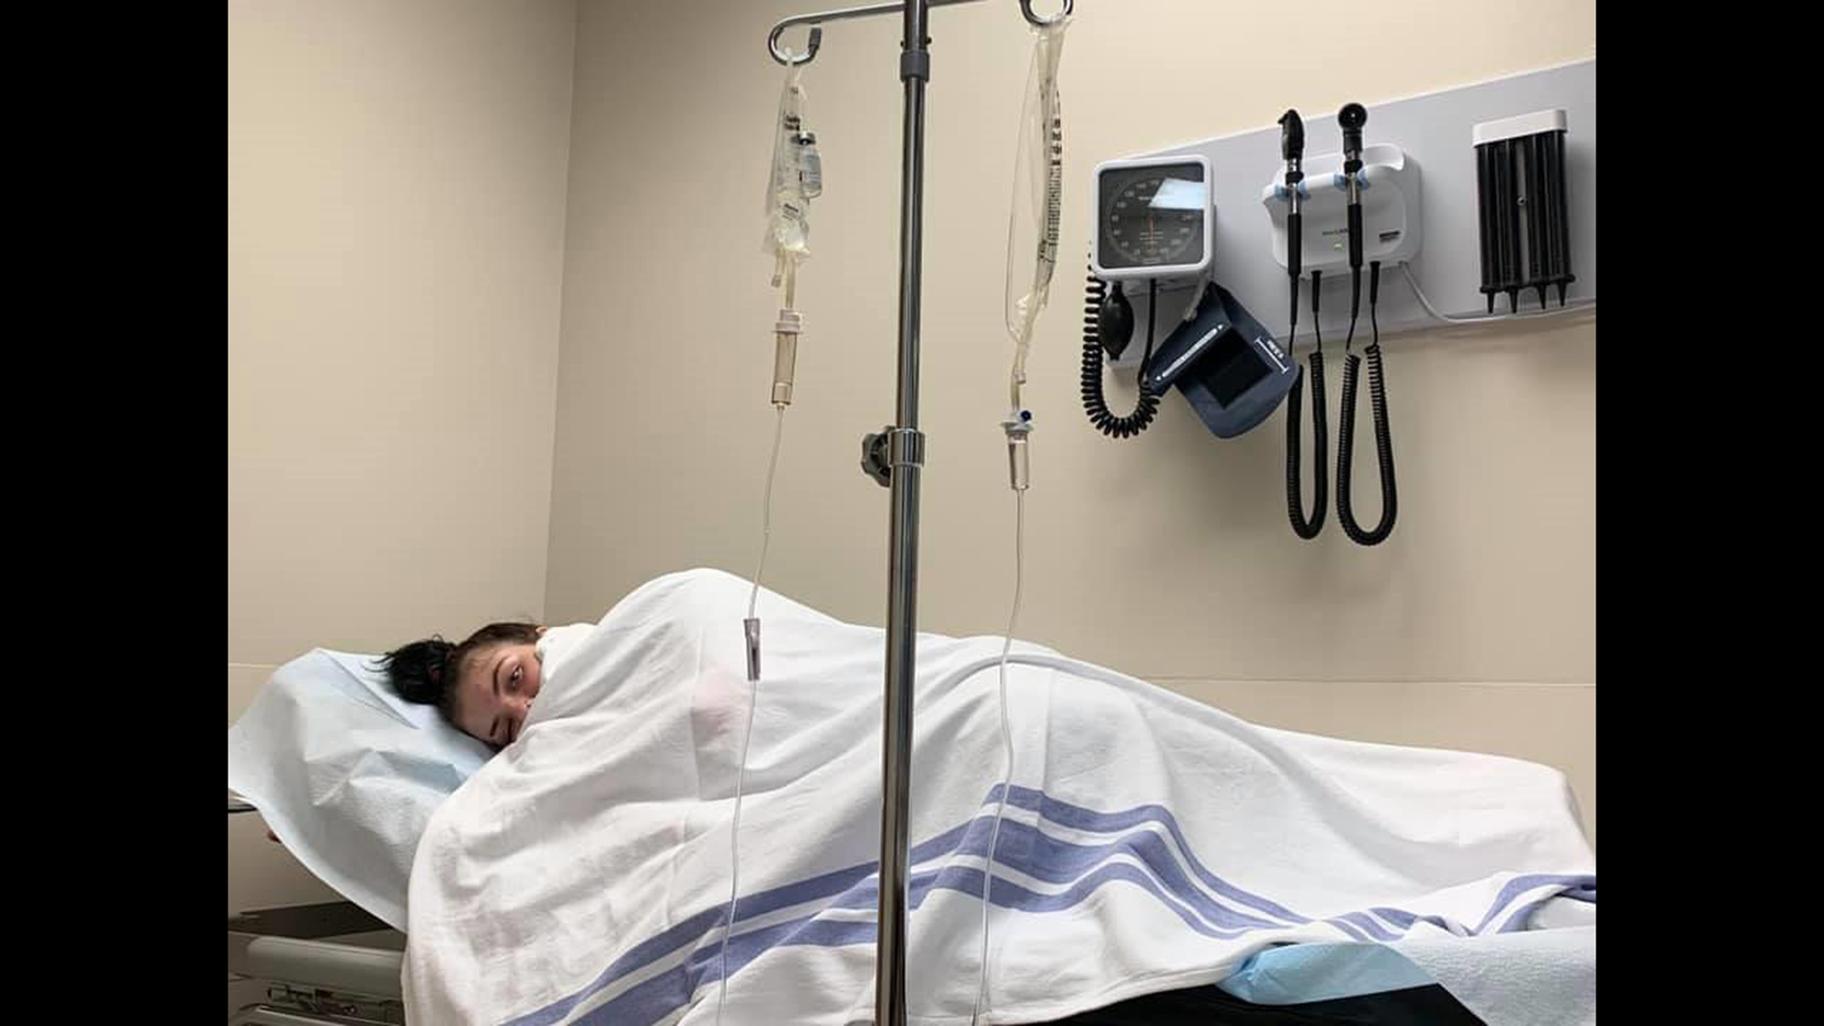 Piper Johnson, 18, is treated in the hospital for a vaping-related respiratory illness. (Photo courtesy of the Johnson family)